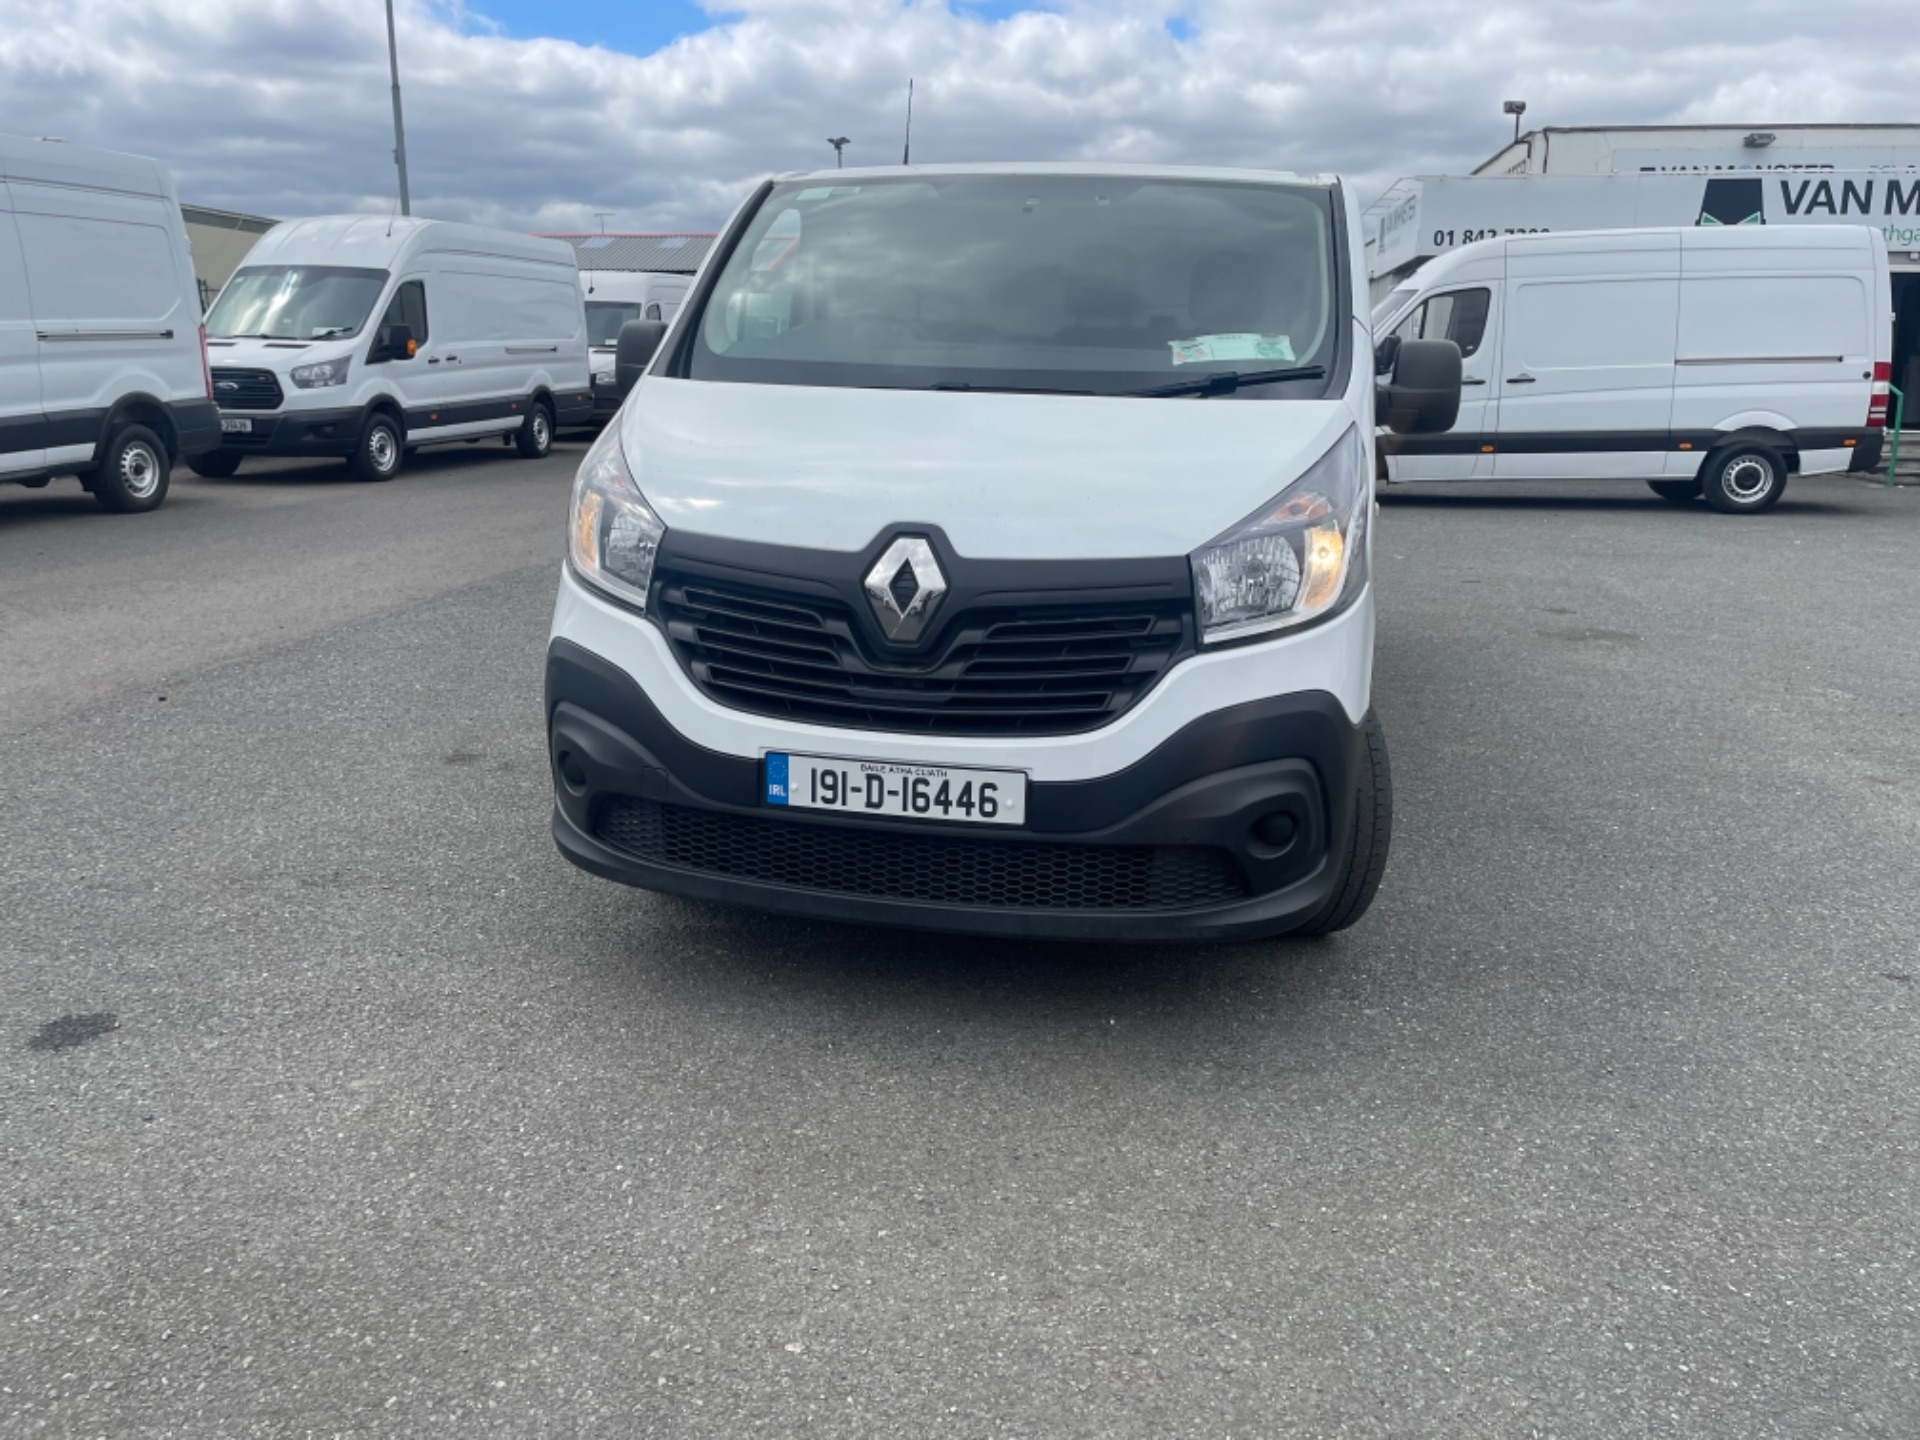 2019 Renault Trafic LL29 DCI 120 Business (191D16446) Image 8